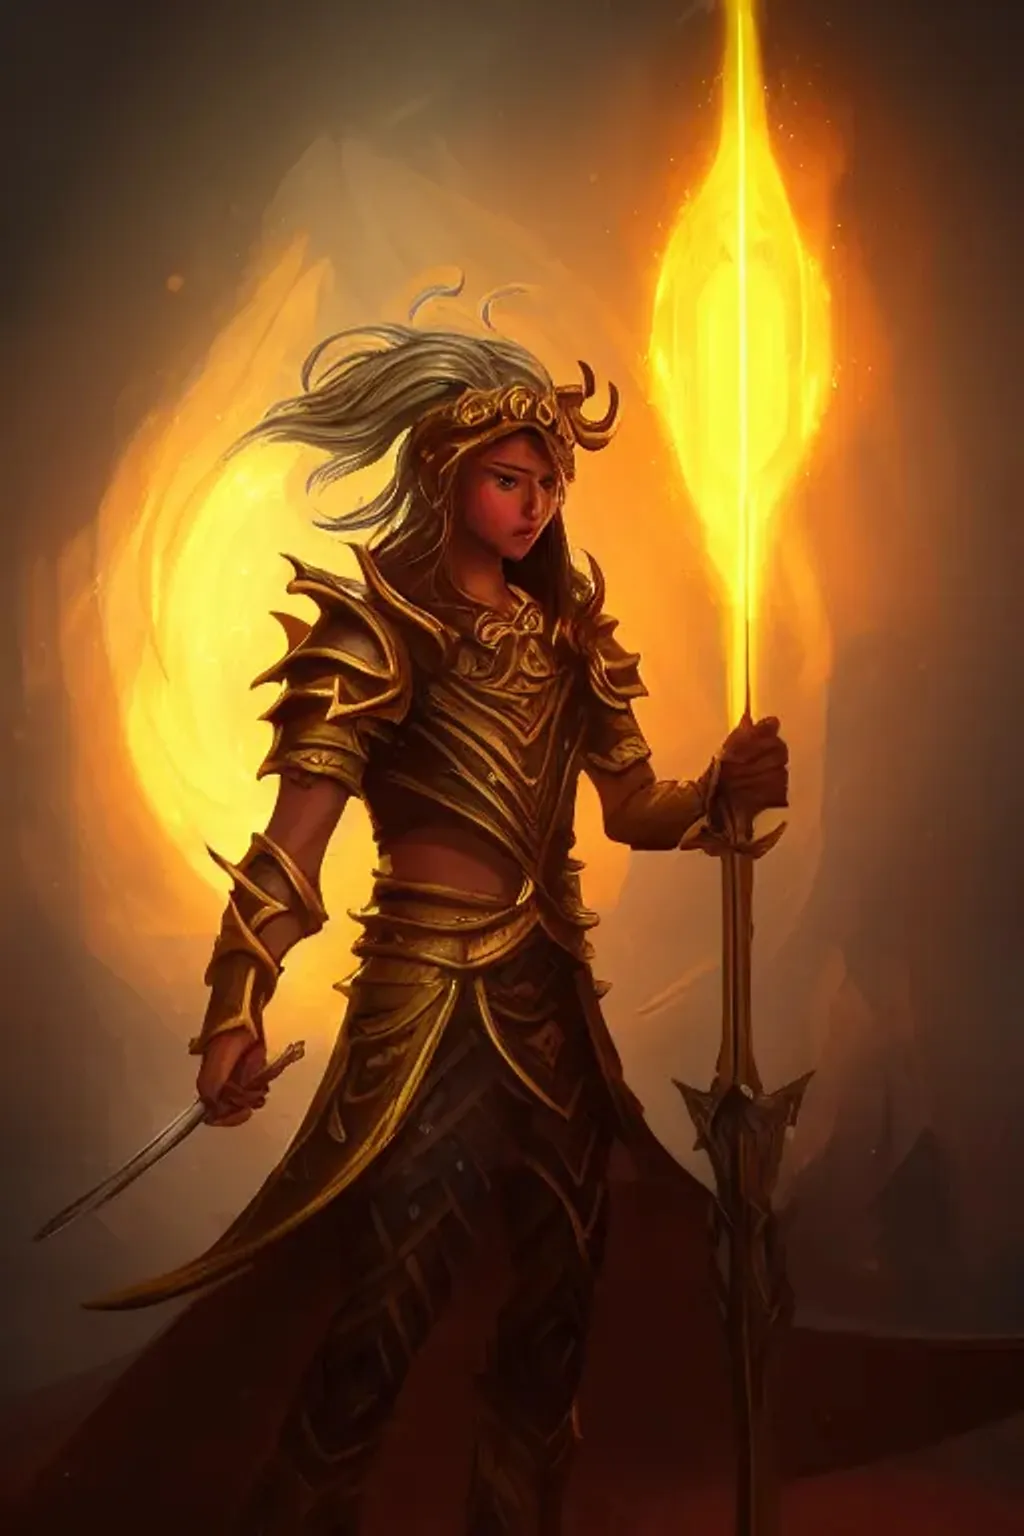 Prompt: a close up of a person with a sword, concept art, inspired by Yang Jin, fantasy art, glowing golden aura, the god poseidon, full portrait of magical knight, hearthstone concept art, golden taurus, fantasy painterly style, completely consisting of fire, magic rune, painted with a thick brush, lina, fantasy character photo, digital art, concept art, by Aleksi Briclot, antipodeans, protogen, league of legends arcane